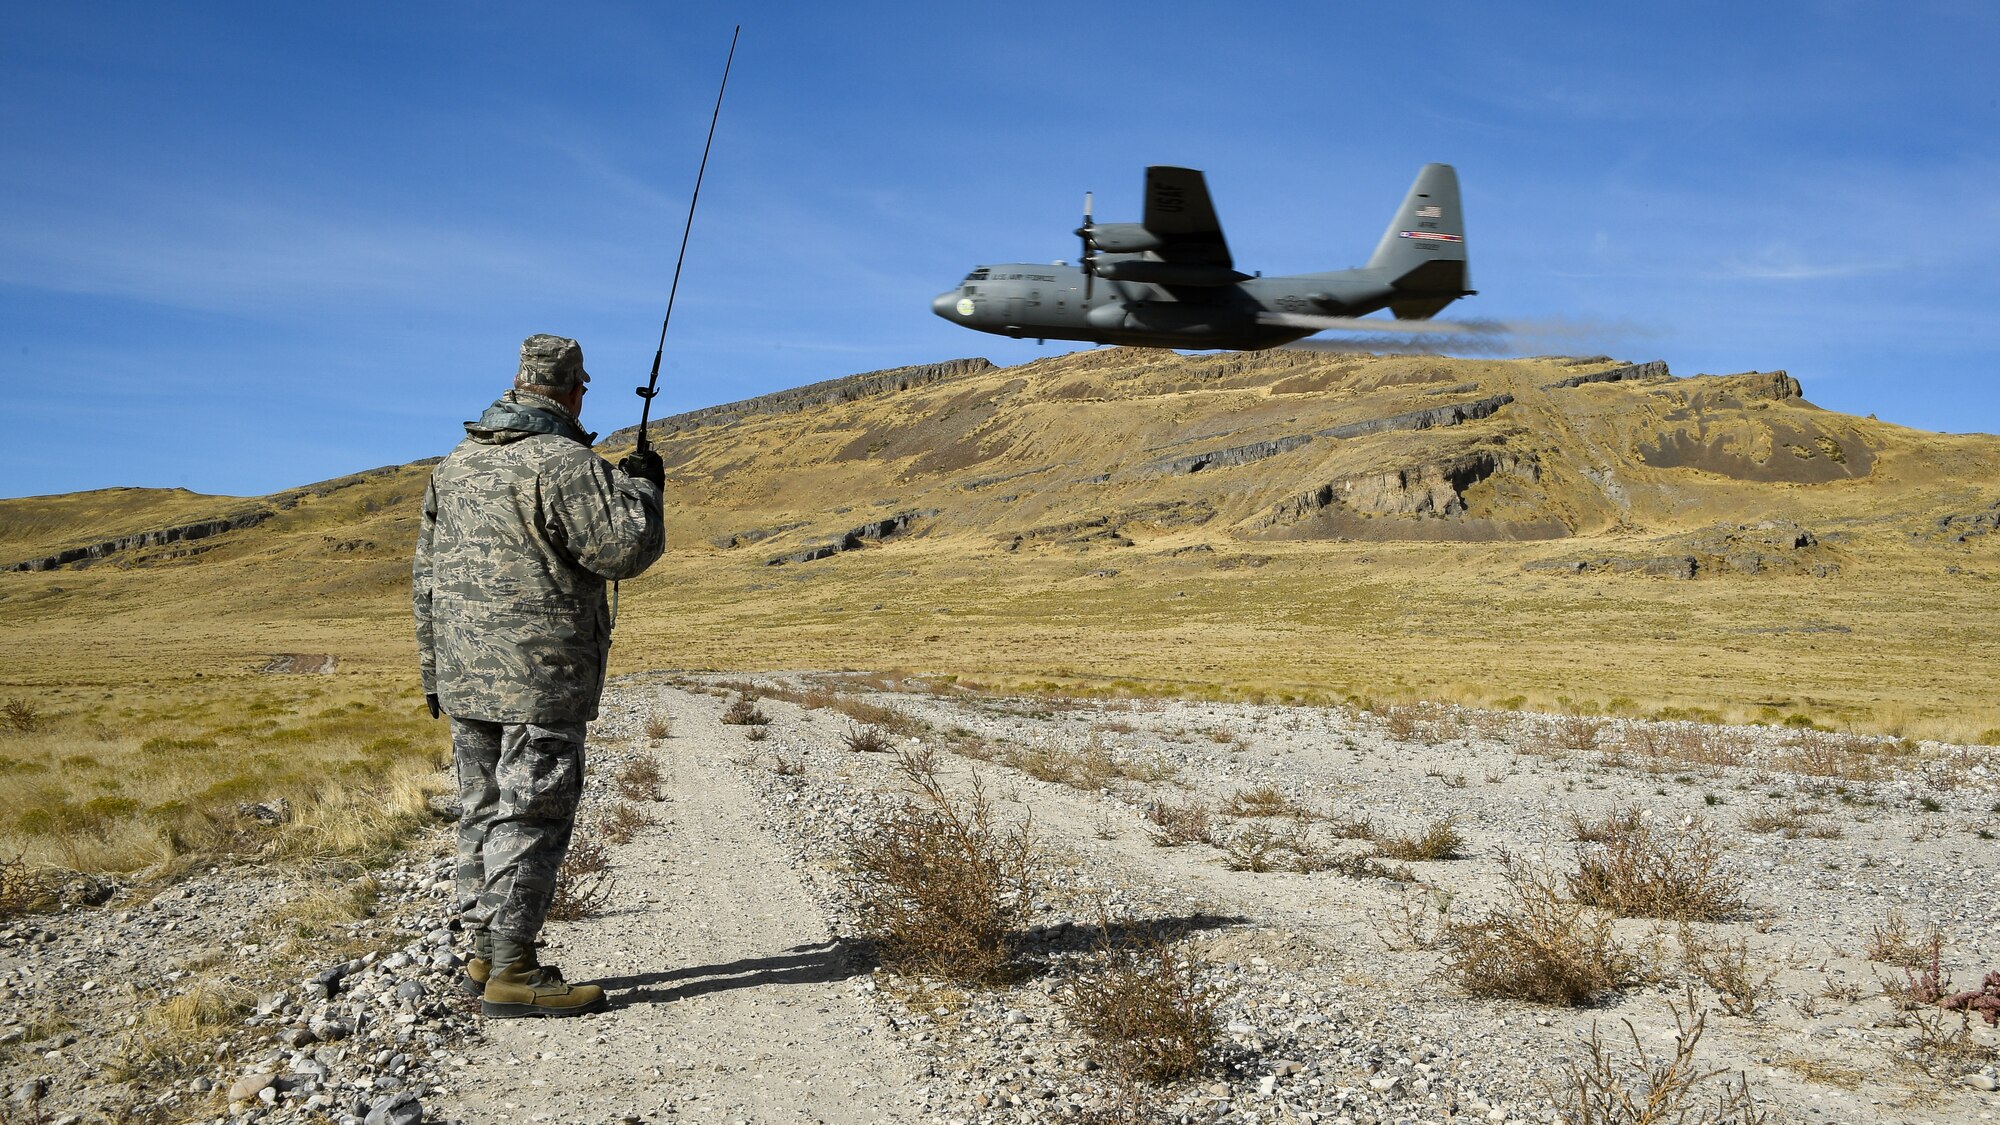 Lt. Col. Don Teig with the Reserve 757th Airlift Squadron communicates with an airbourne C-130 Hercules crew during an aerial spray operation at the Utah Test and Training Range on Oct. 24, 2019.